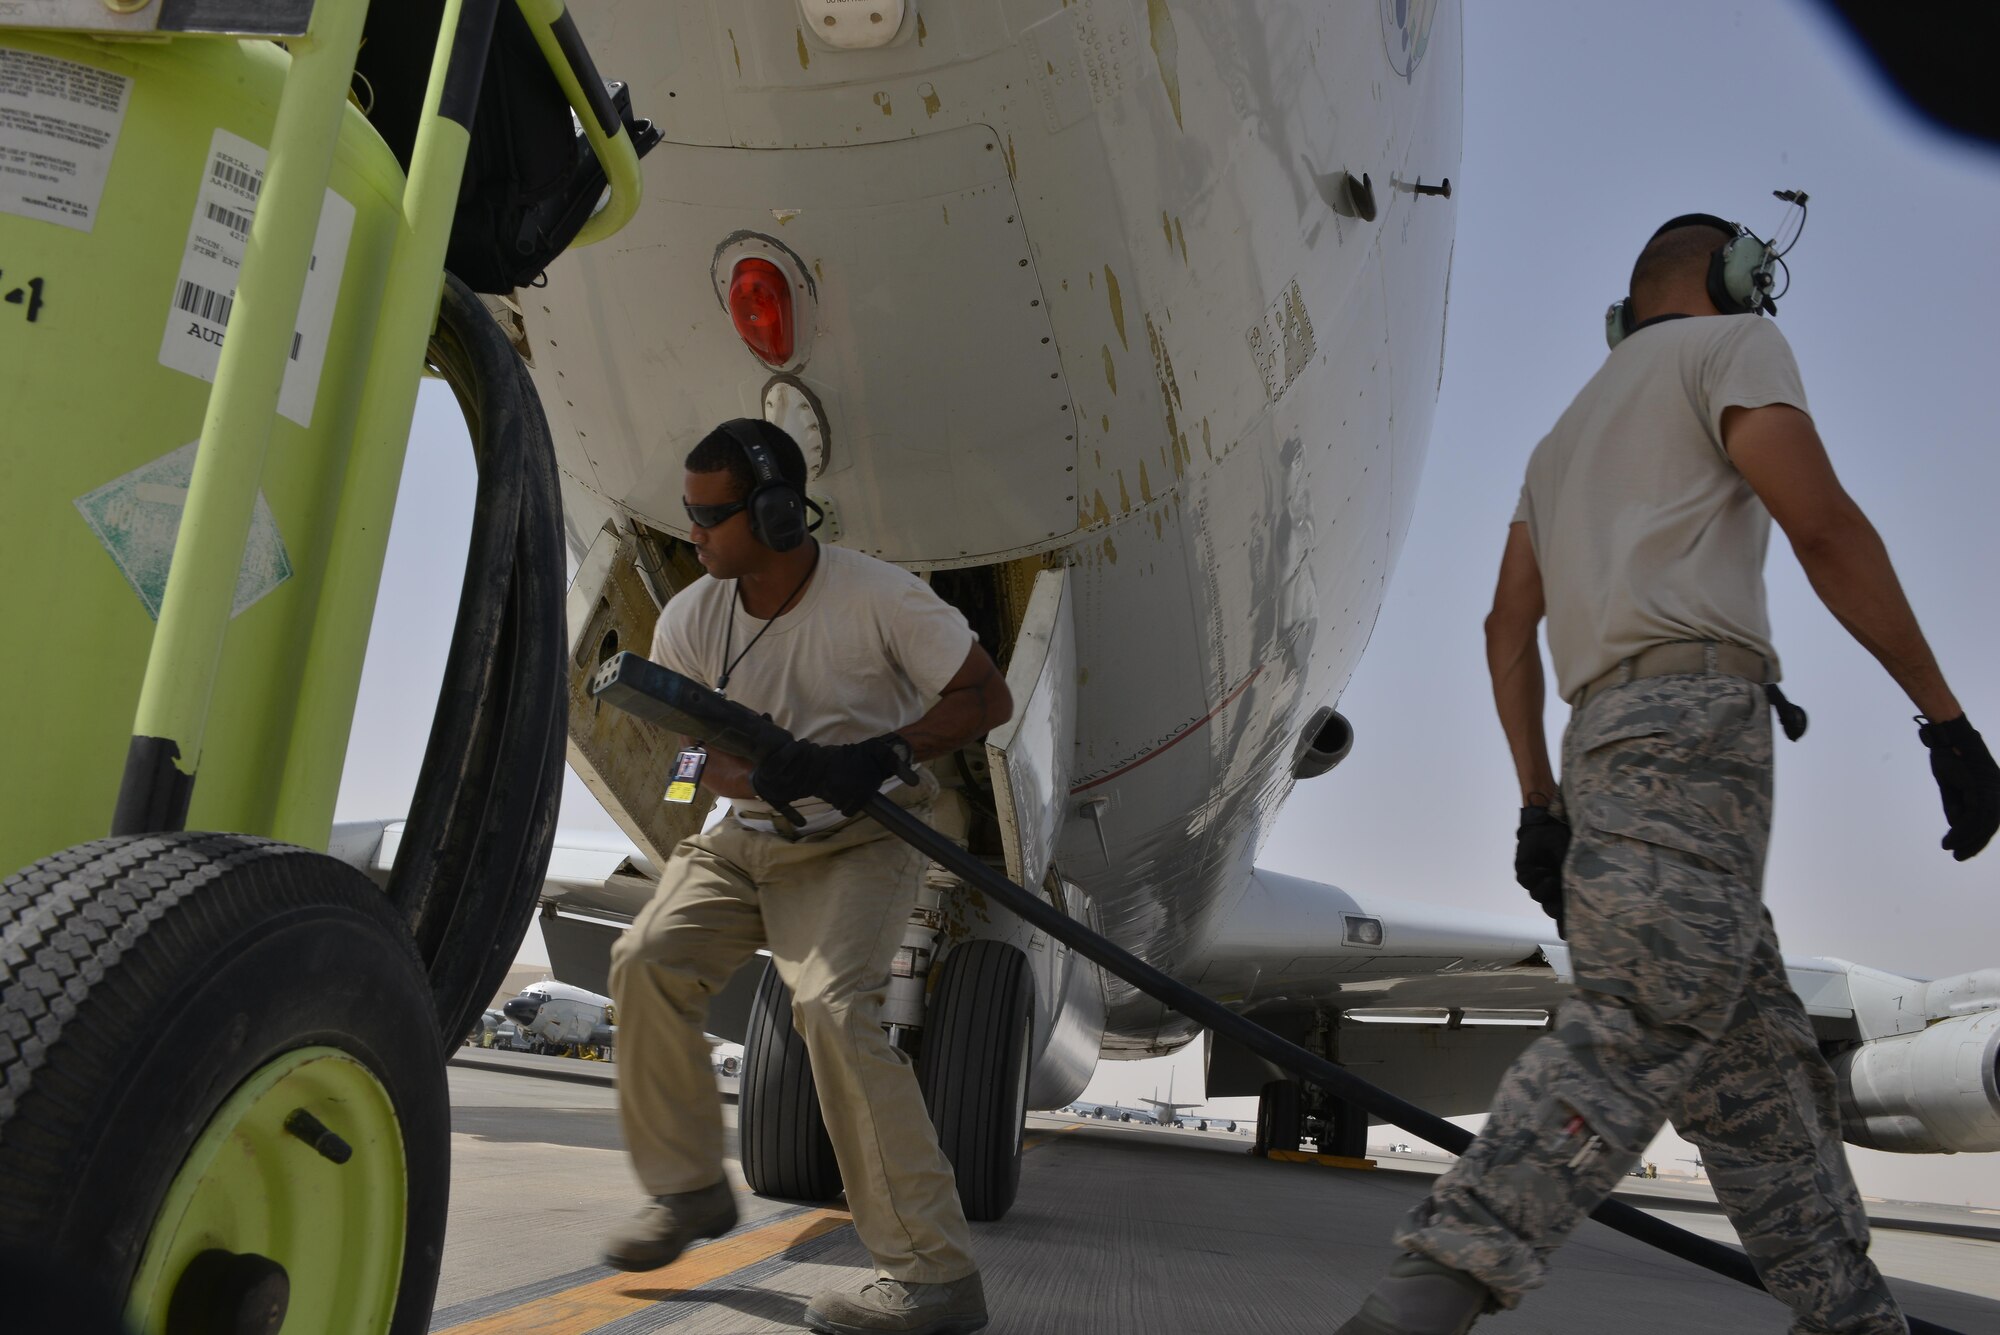 Airman from the 7th Expeditionary Air Mobility Unit prepare a Boeing E-8C Joint Surveillance Target Attack Radar Systems aircraft for maintenance checks after completing its 100K combat hours milestone mission June 2, 2015 Al Udeid Air Base, Qatar. The E-8C JSTARS and its active duty, guard and reserve service members conduct missions overseas to support operations on the war on terror. During this time JSTARS completed 100K combat hours by continually flying 24/7 for 11.4 years. (U.S. Air Force photo/Staff Sgt. Alexandre Montes)